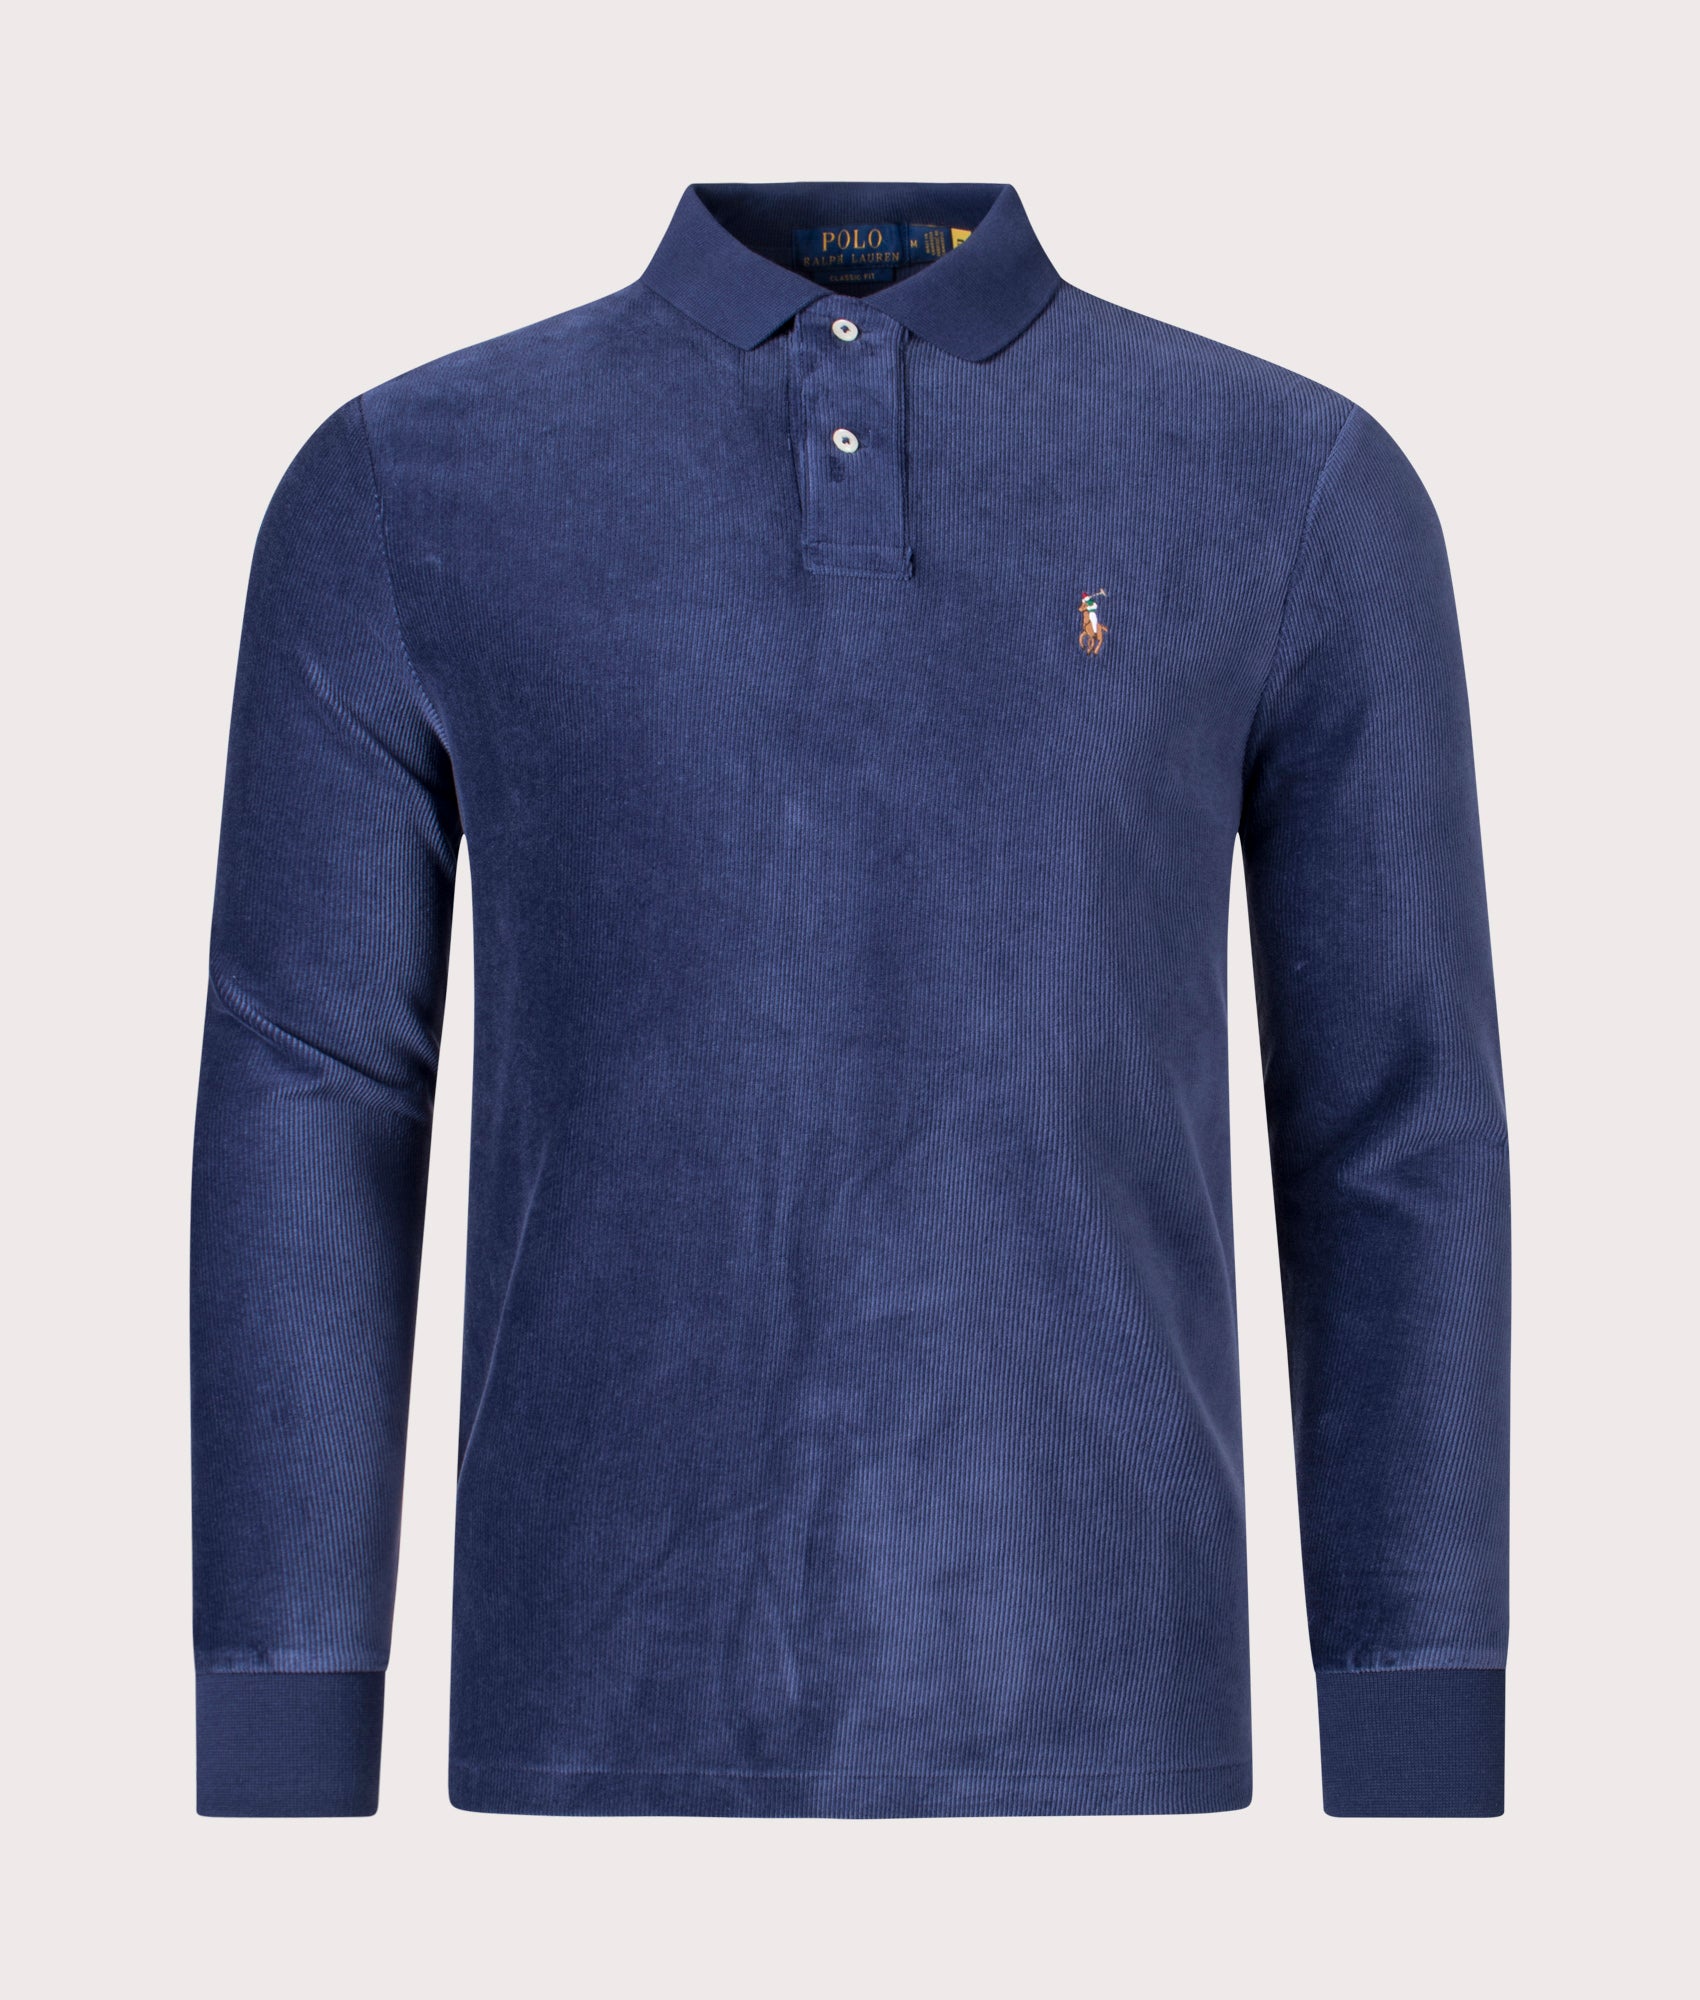 Polo Ralph Lauren Mens Relaxed Fit Long Sleeve Corduroy Polo Shirt - Colour: 001 Newport Navy - Size